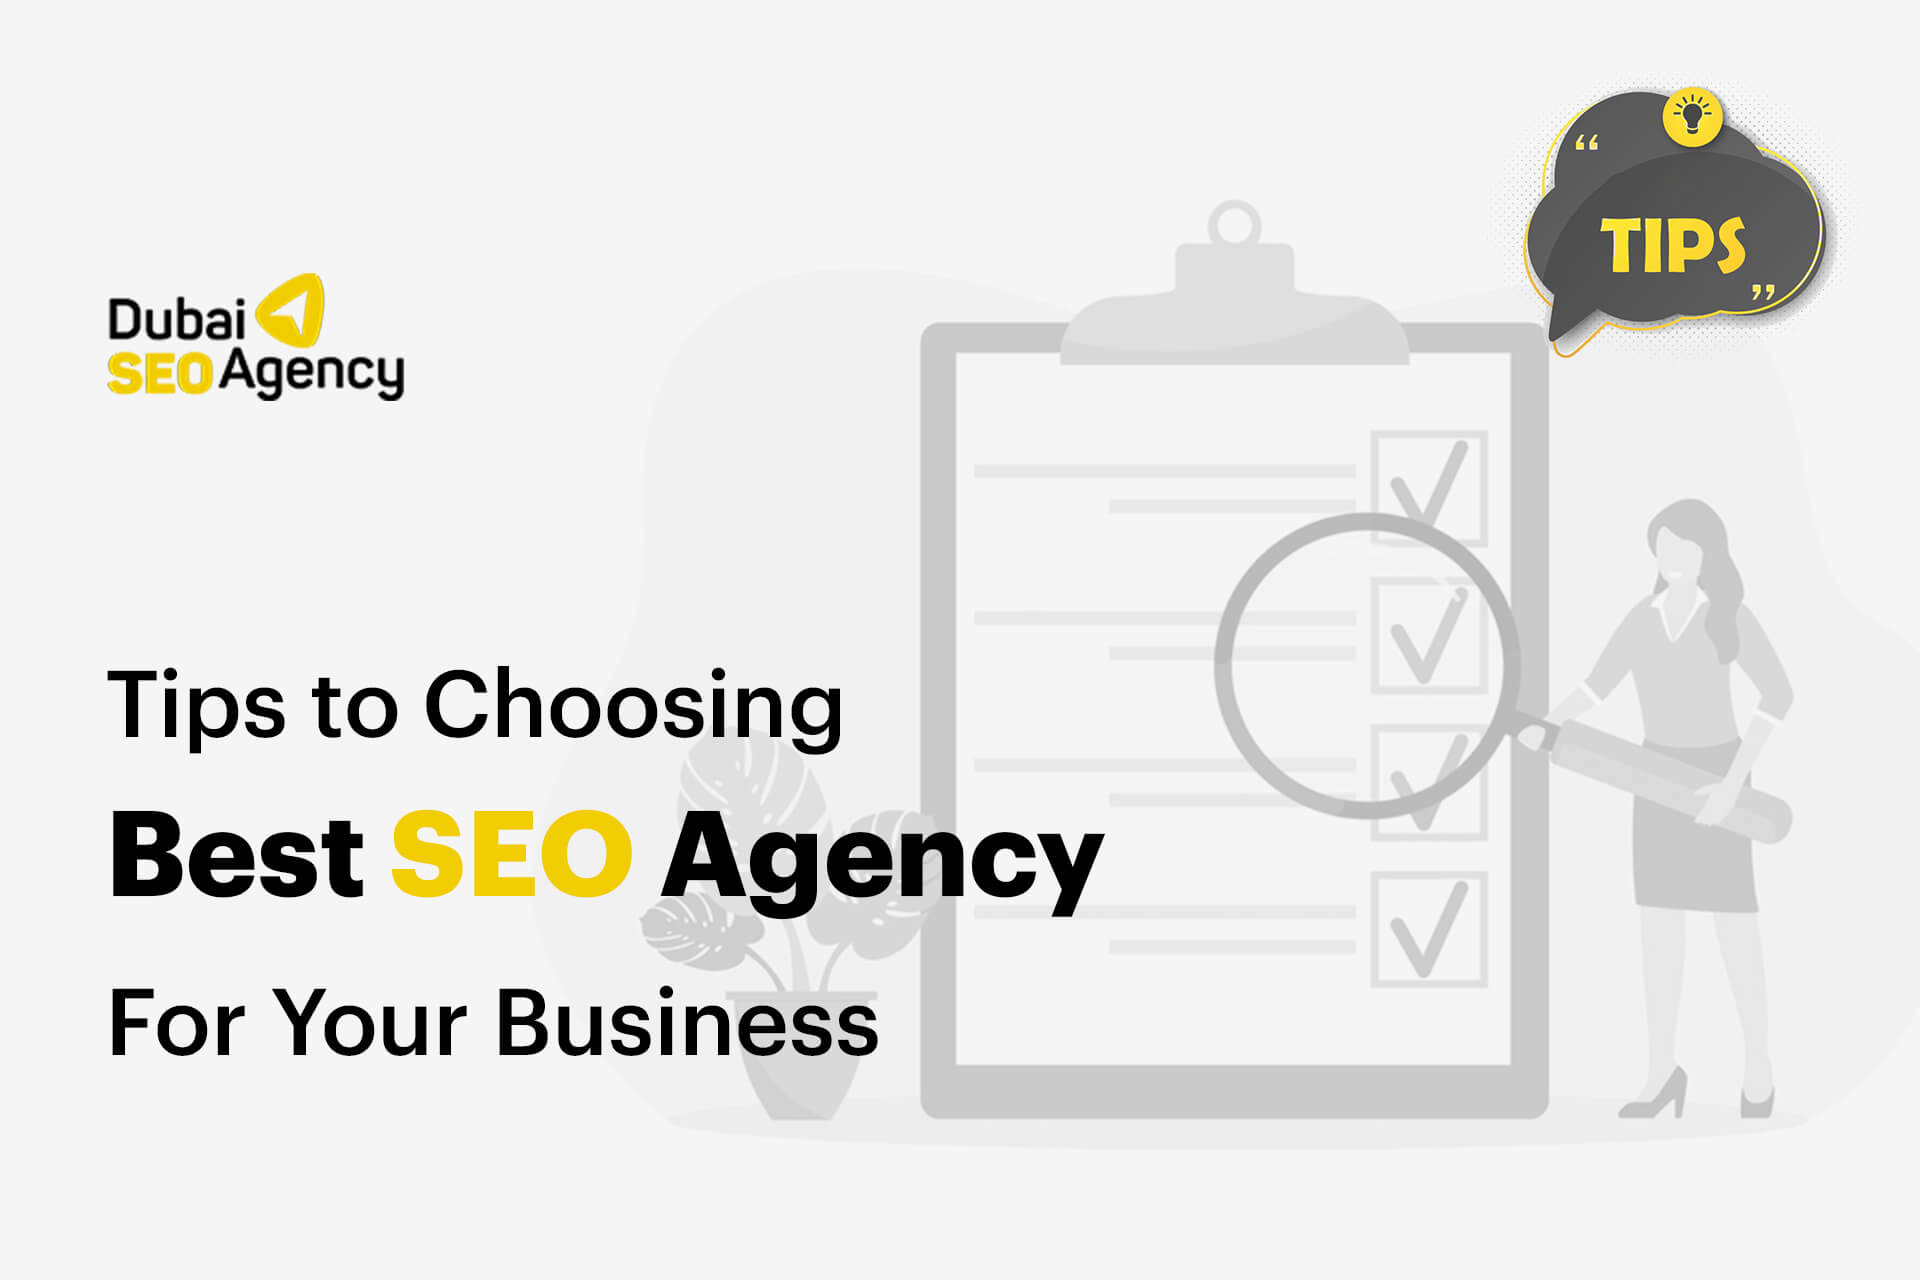 Tips to Choosing Best SEO Agency For Your Business